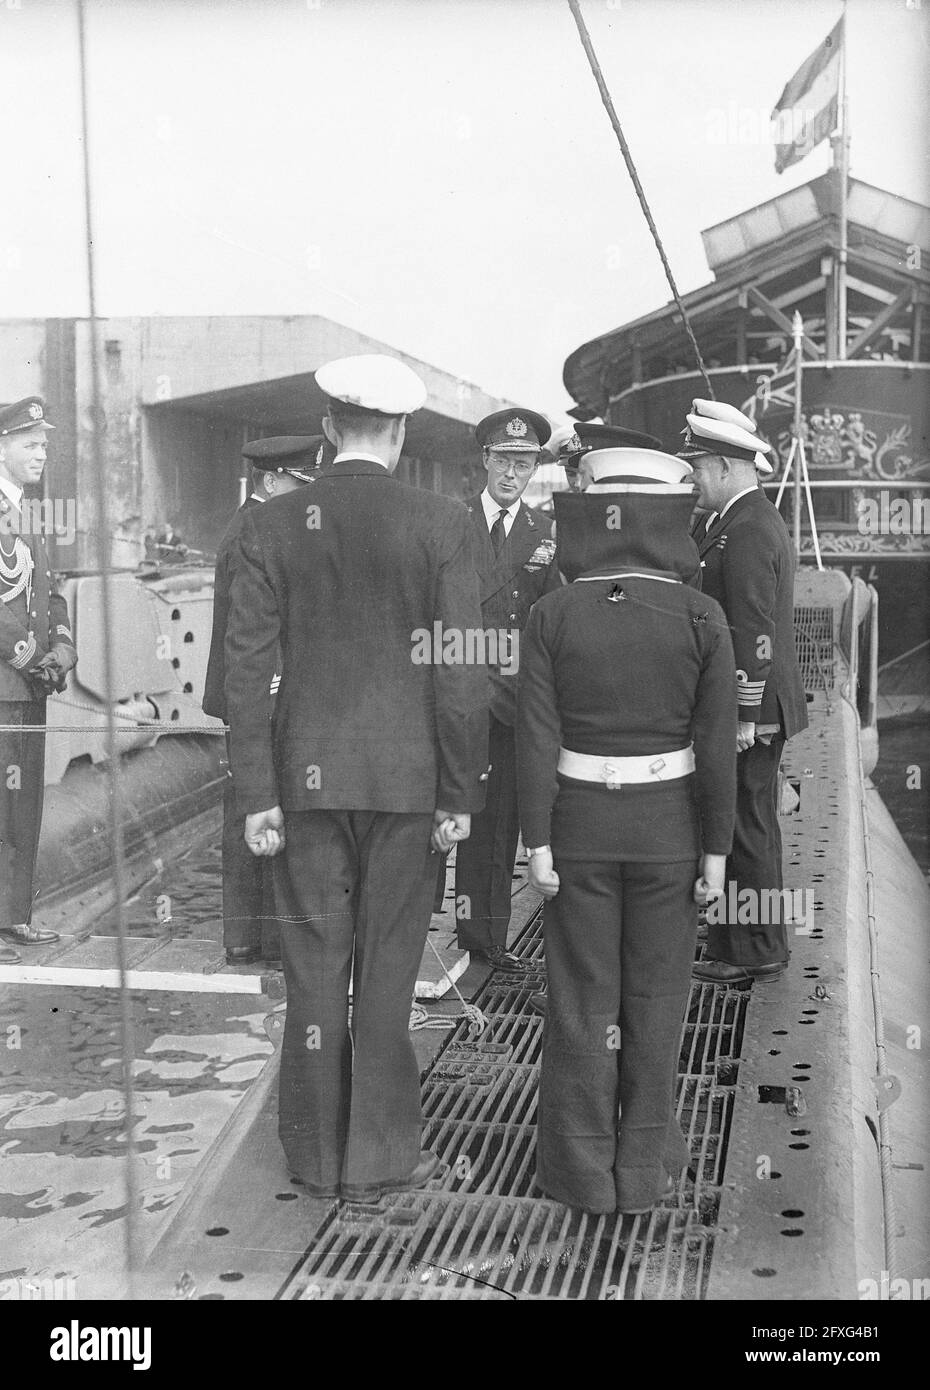 Forty-year jubilee Submarine Service. Prince Bernhard during visit to Waalhaven, June 18, 1947, ports, anniversaries, navy, The Netherlands, 20th century press agency photo, news to remember, documentary, historic photography 1945-1990, visual stories, human history of the Twentieth Century, capturing moments in time Stock Photo